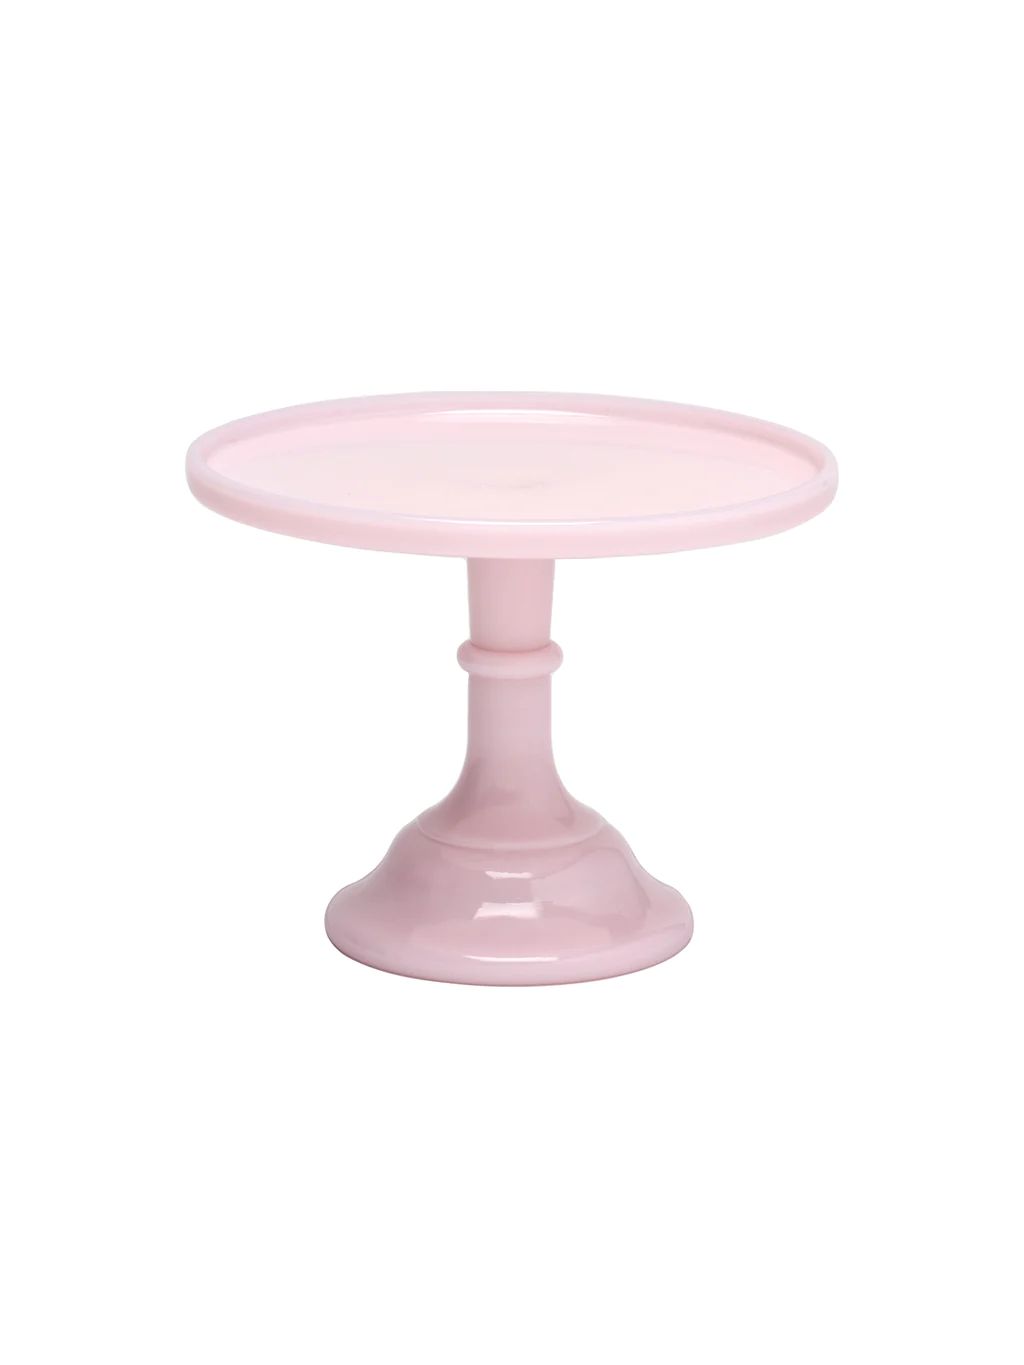 Mosser Crown Tuscan Pink Milk Glass Cake Stand | Weston Table